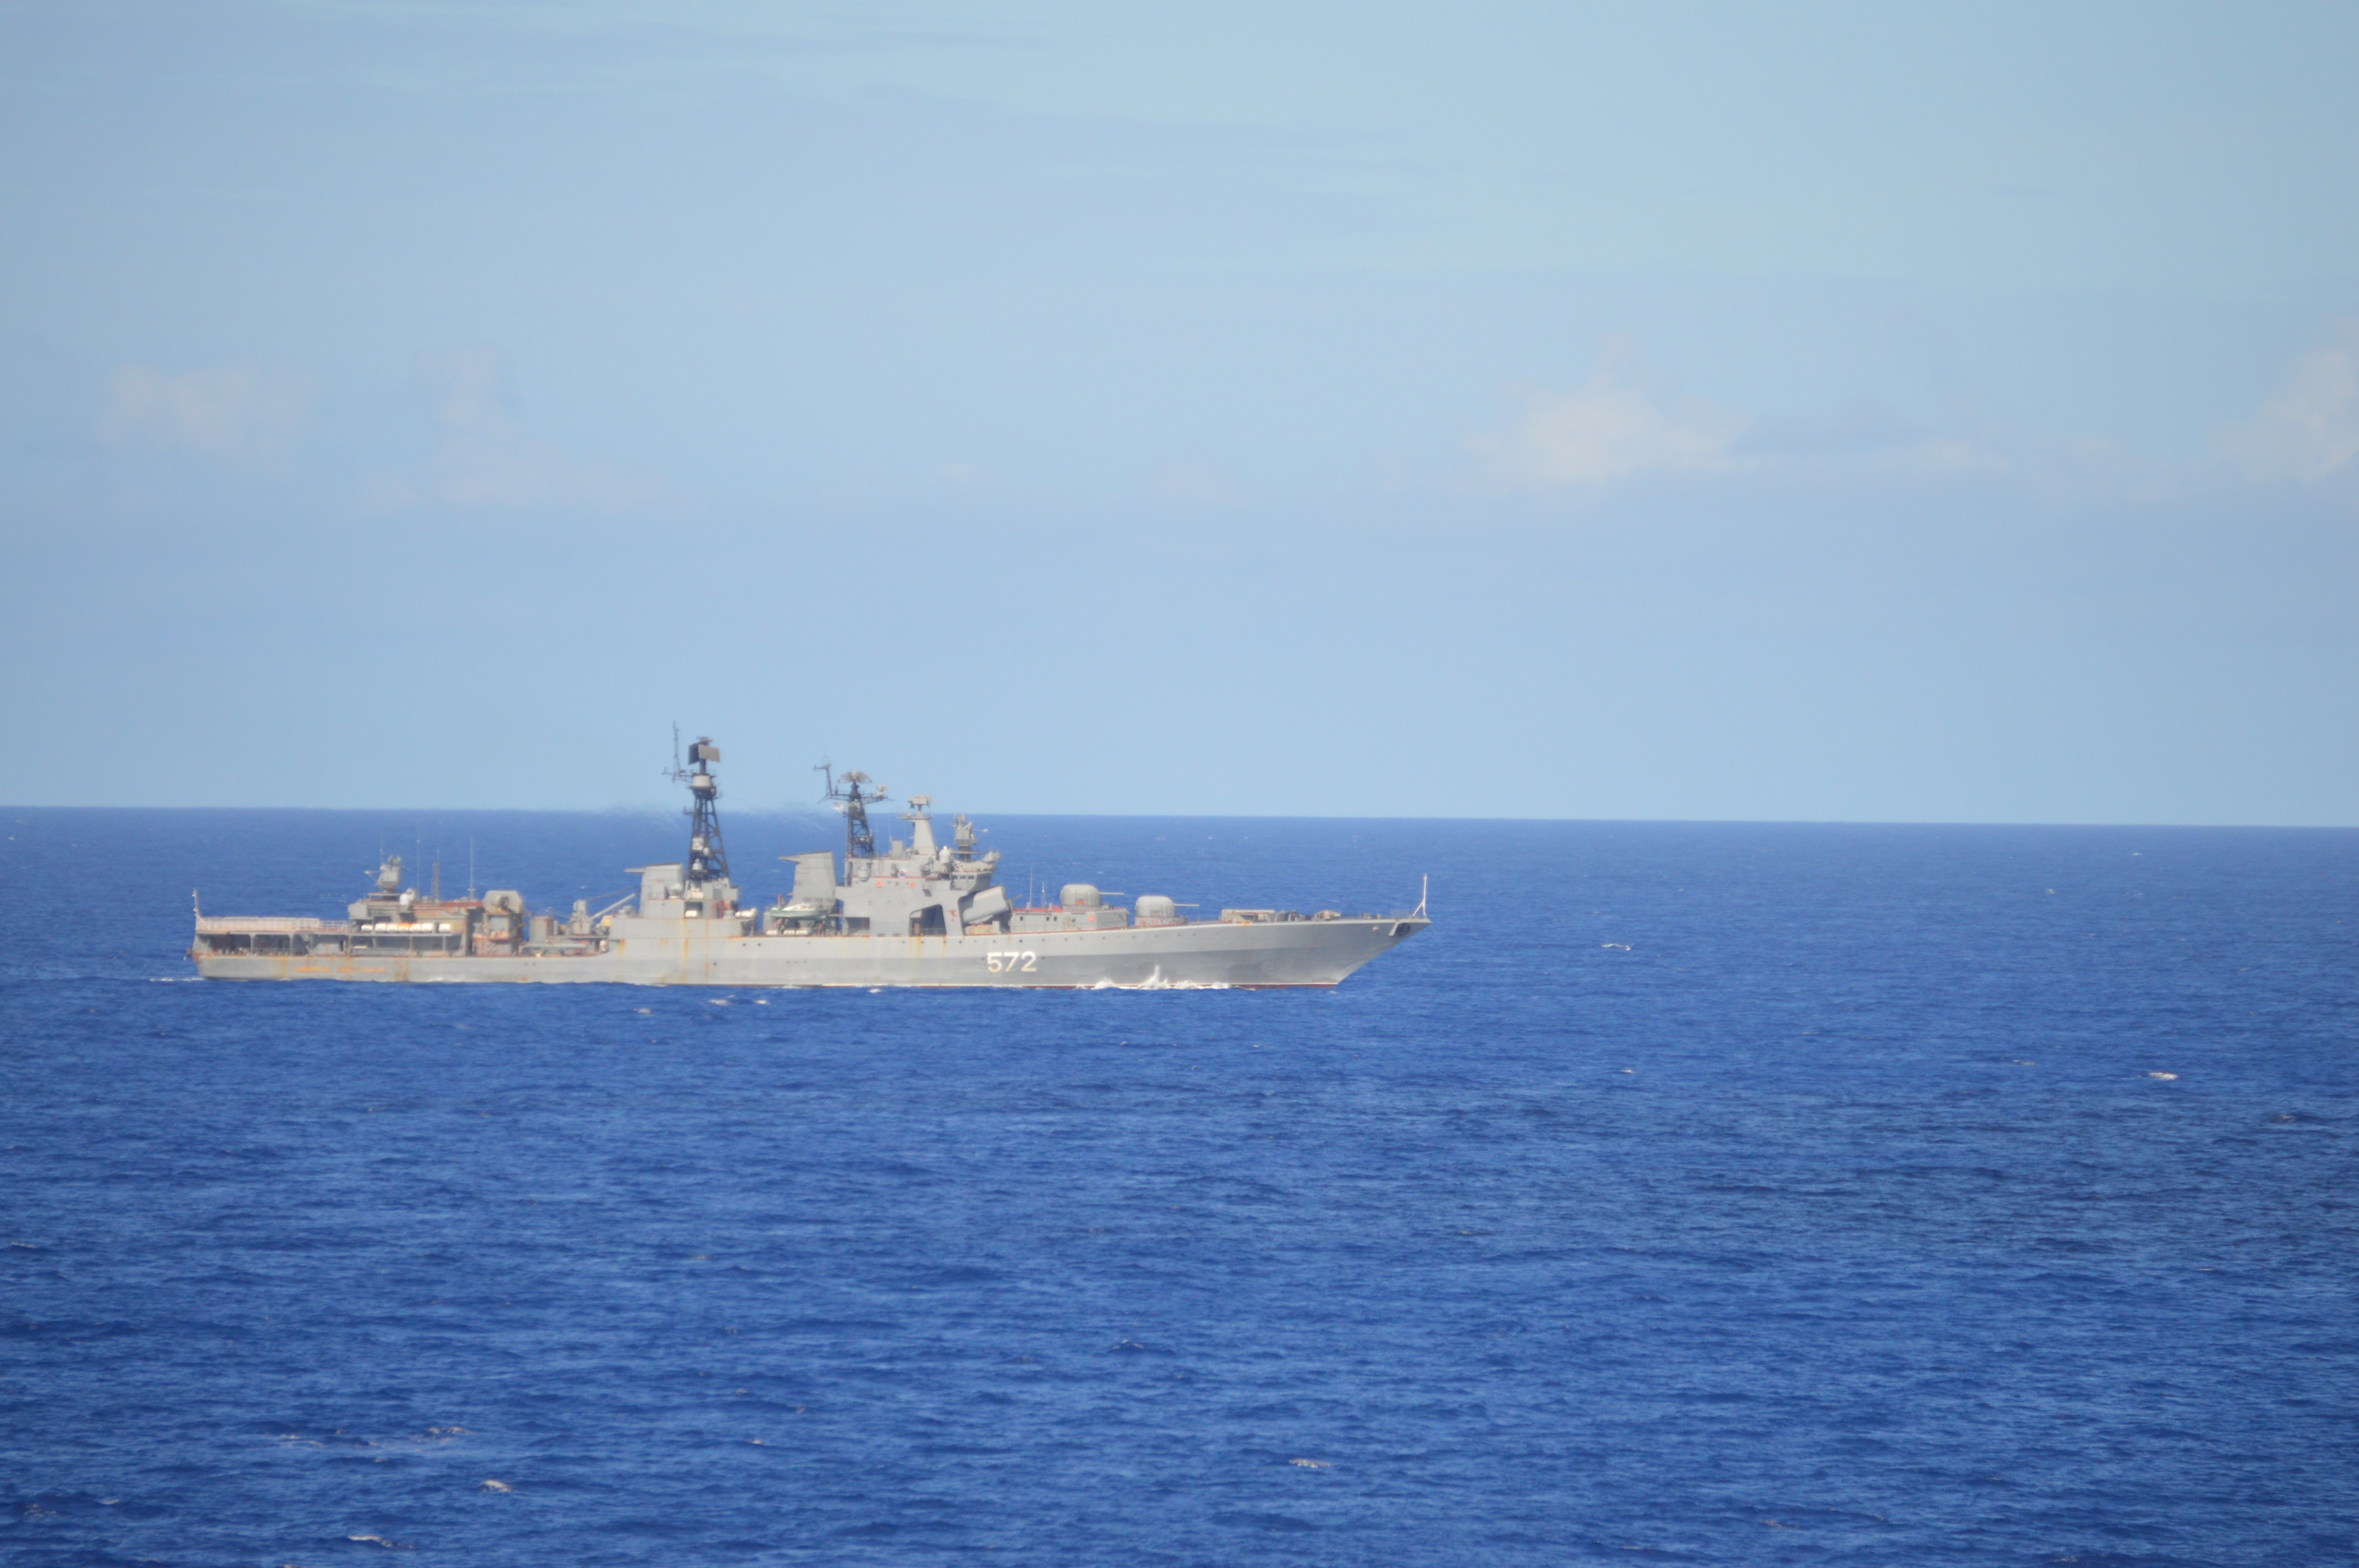 The Russian Udaloy-class destroyer Admiral Vinogradov (DD-572) seen on July 17, 2016 off USS America. USNI News Photo 